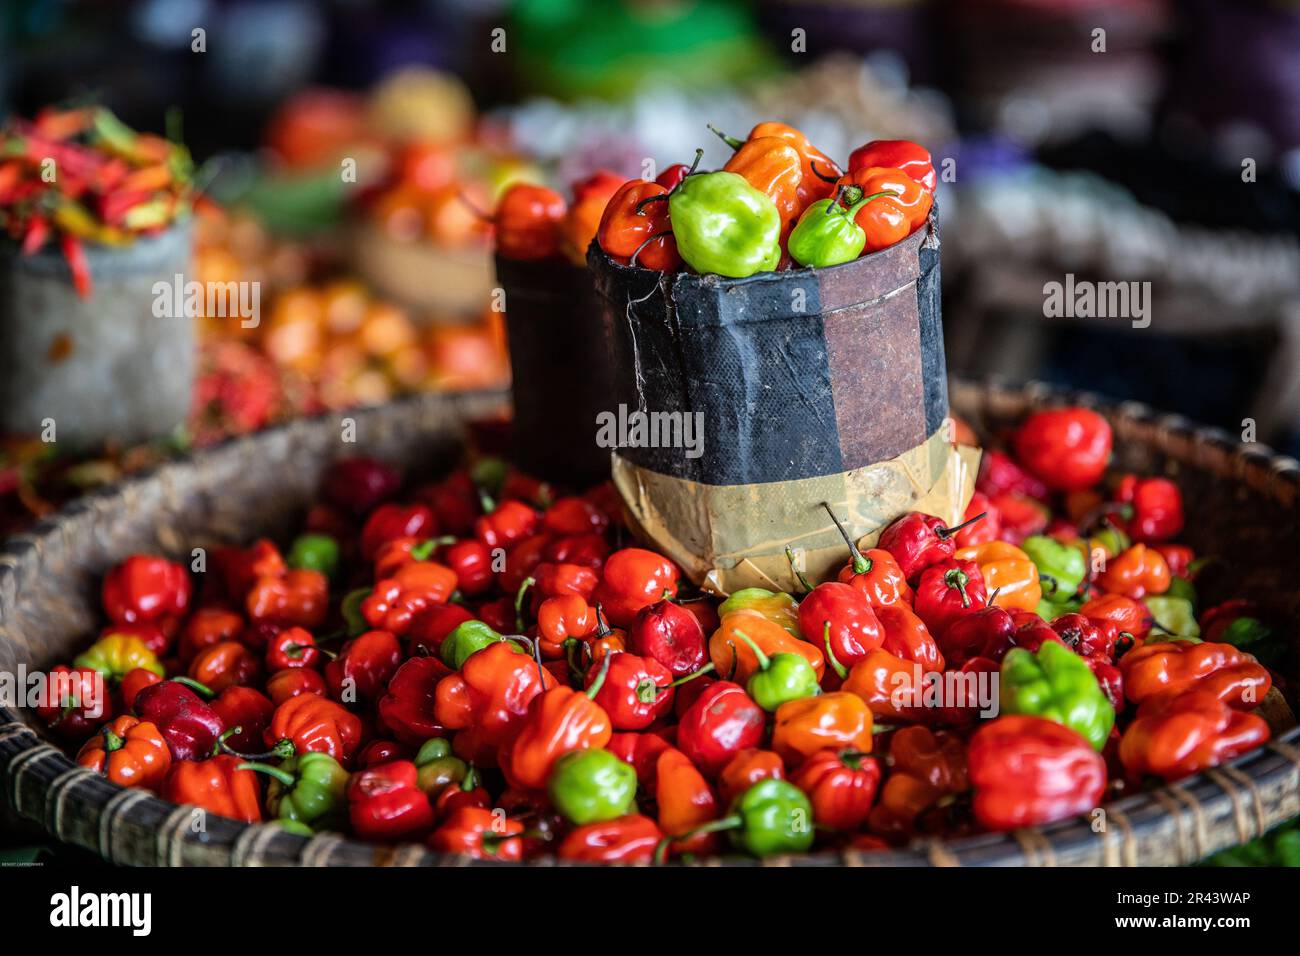 red and green pepper on a market, tana toraja, sulawesi, Indonesia Stock Photo